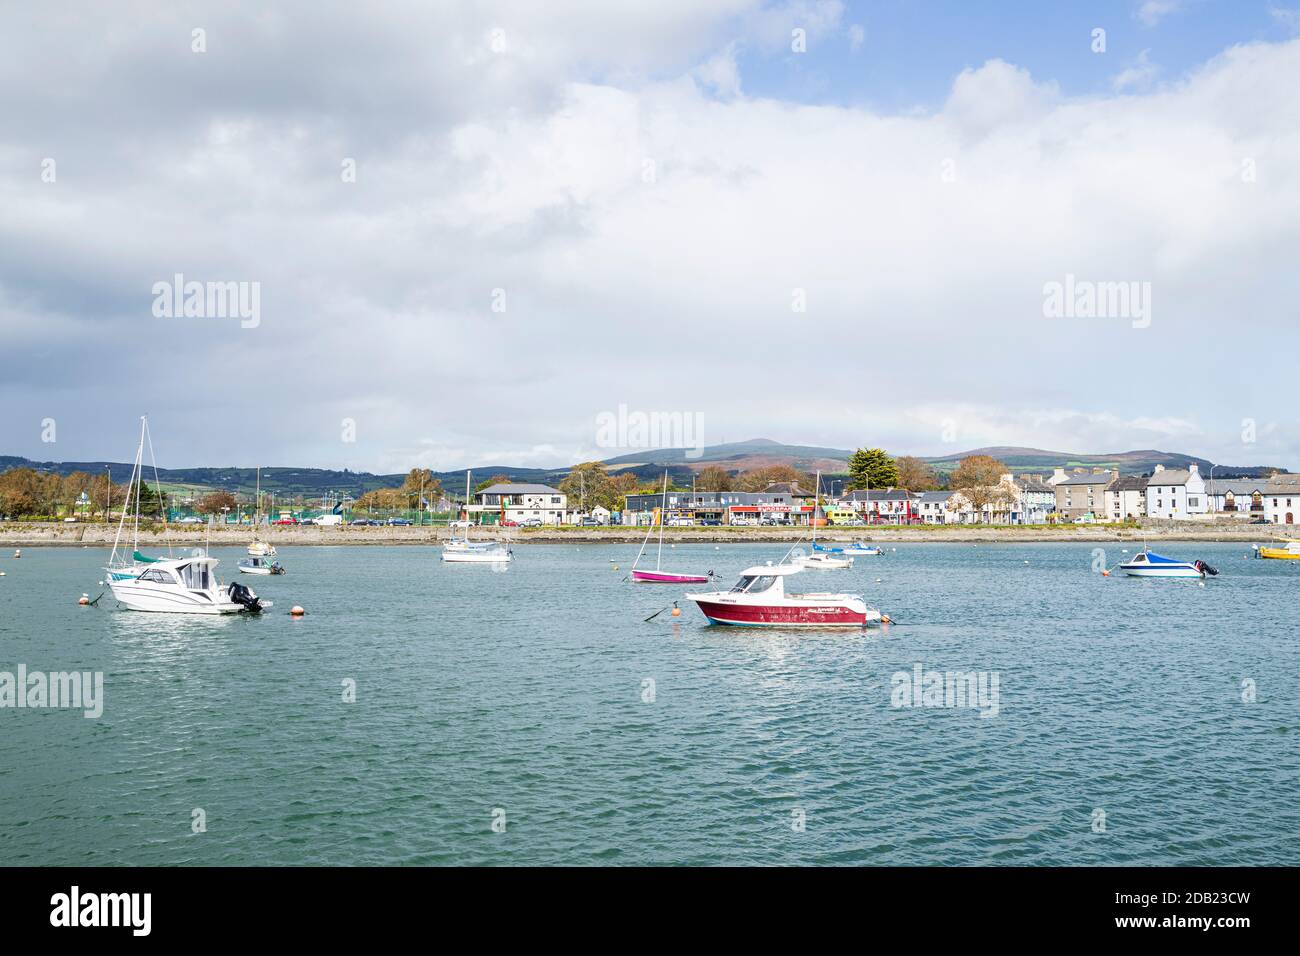 Boats moored in the harbour at Dungarvan, County Waterford, Ireland, Stock Photo